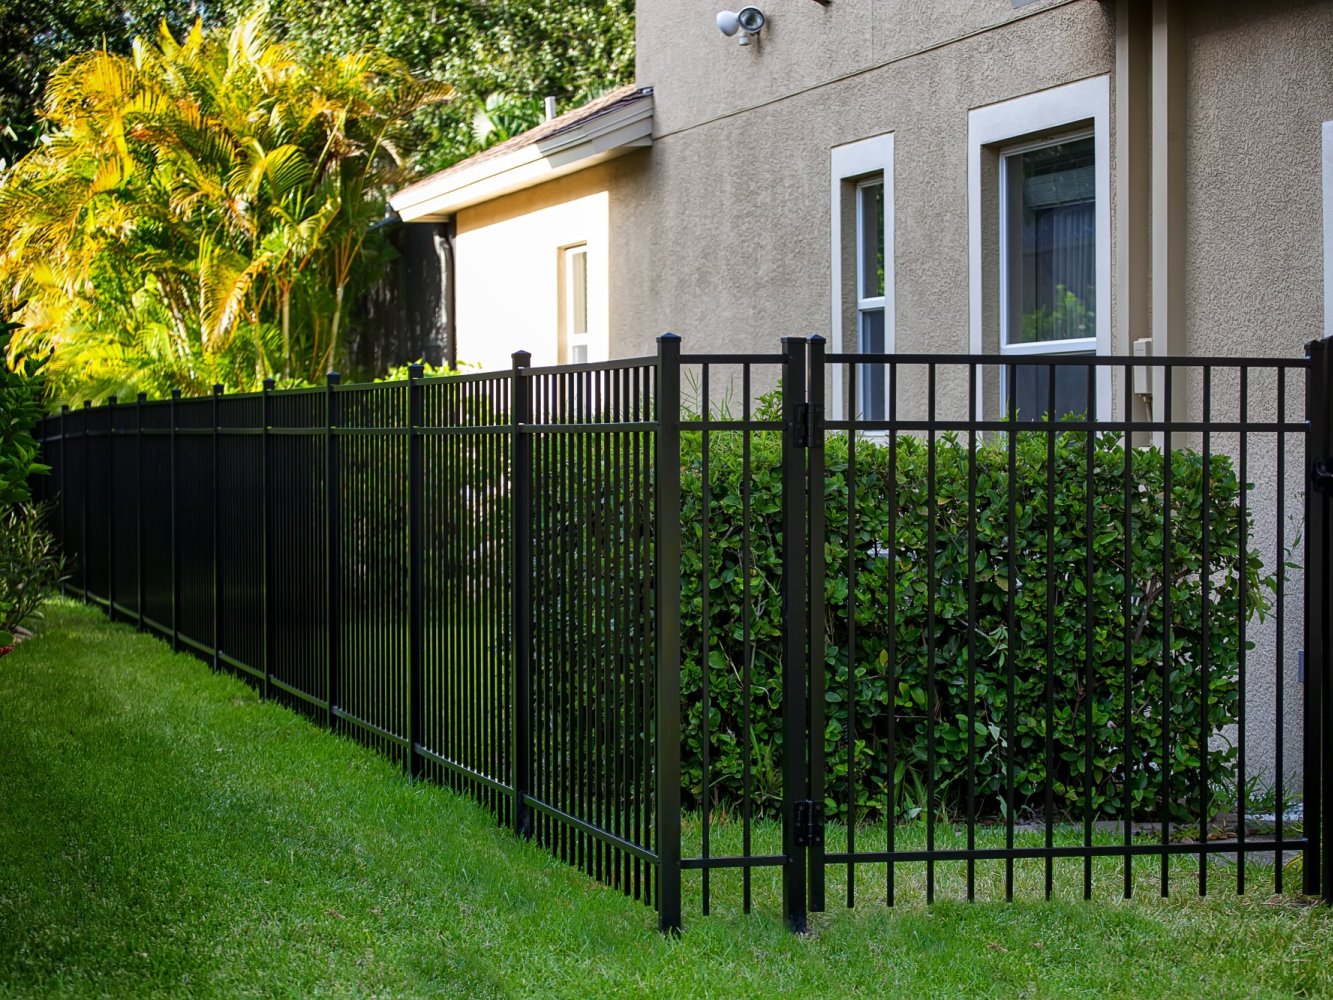 Southlake Texas residential fencing company